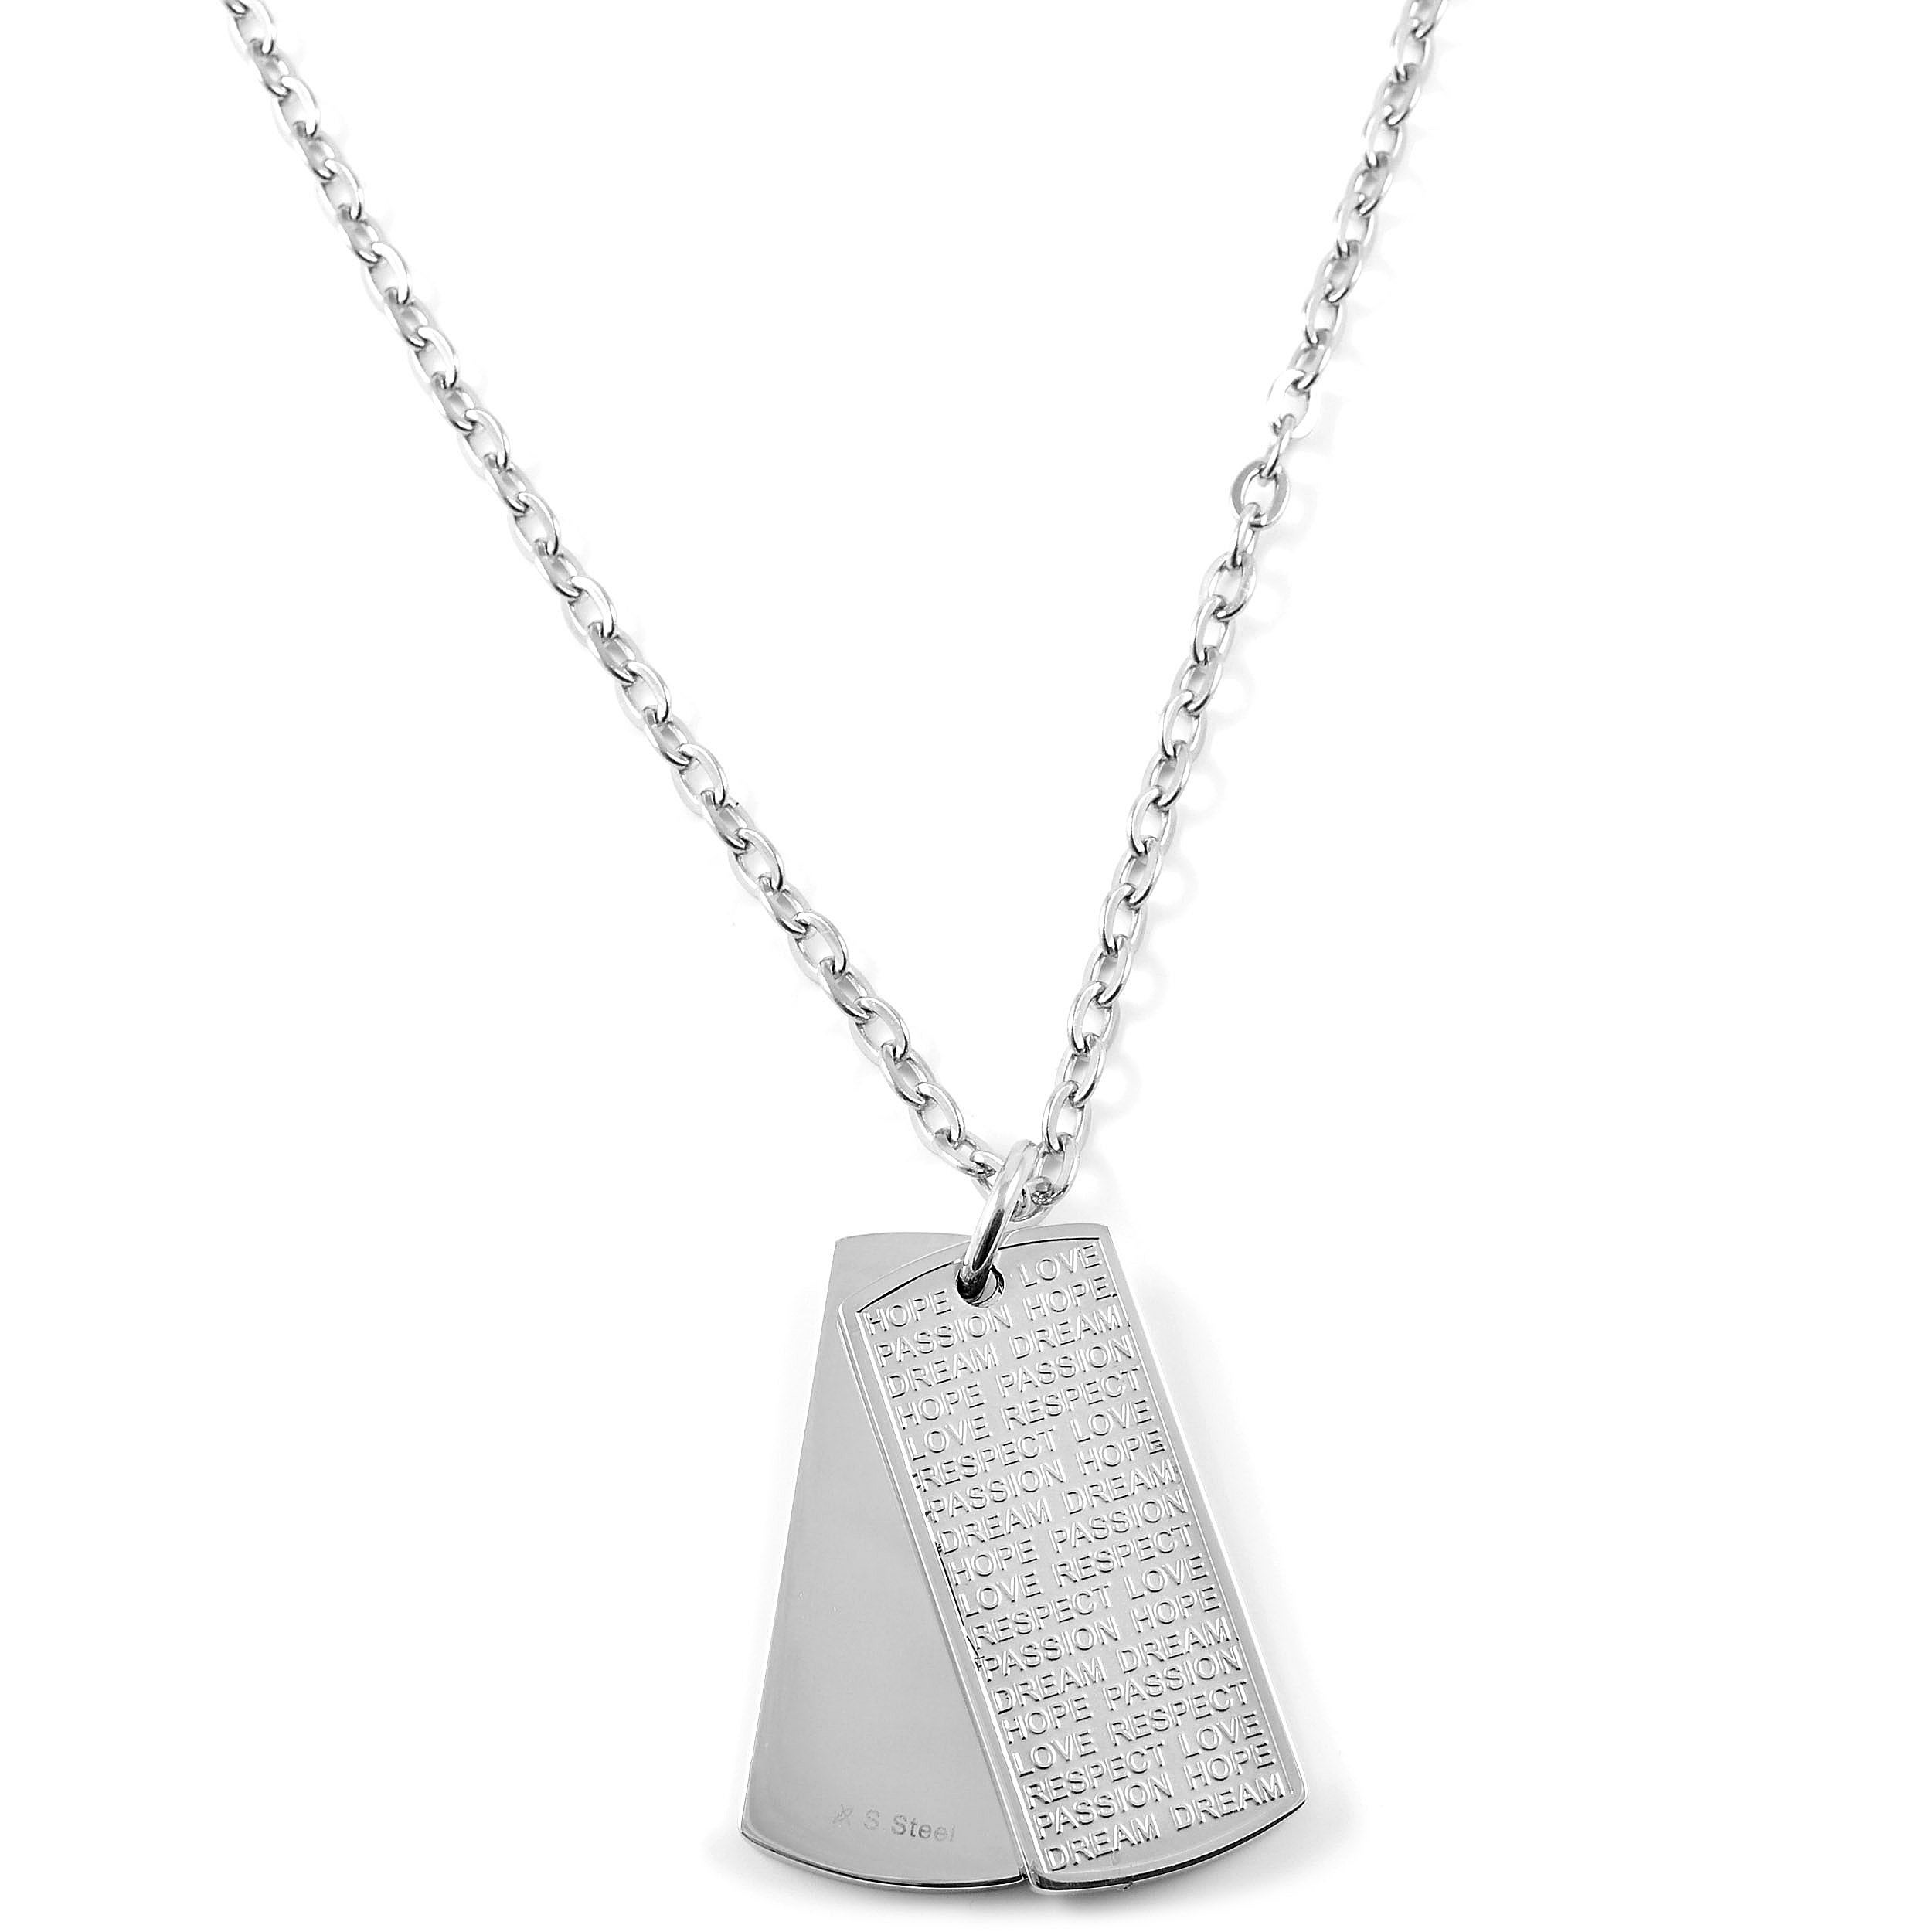 Unique Tungsten Tag Necklace. 4mm wide Surgical Stainless Steel Box Ch –  GestaltCouture®